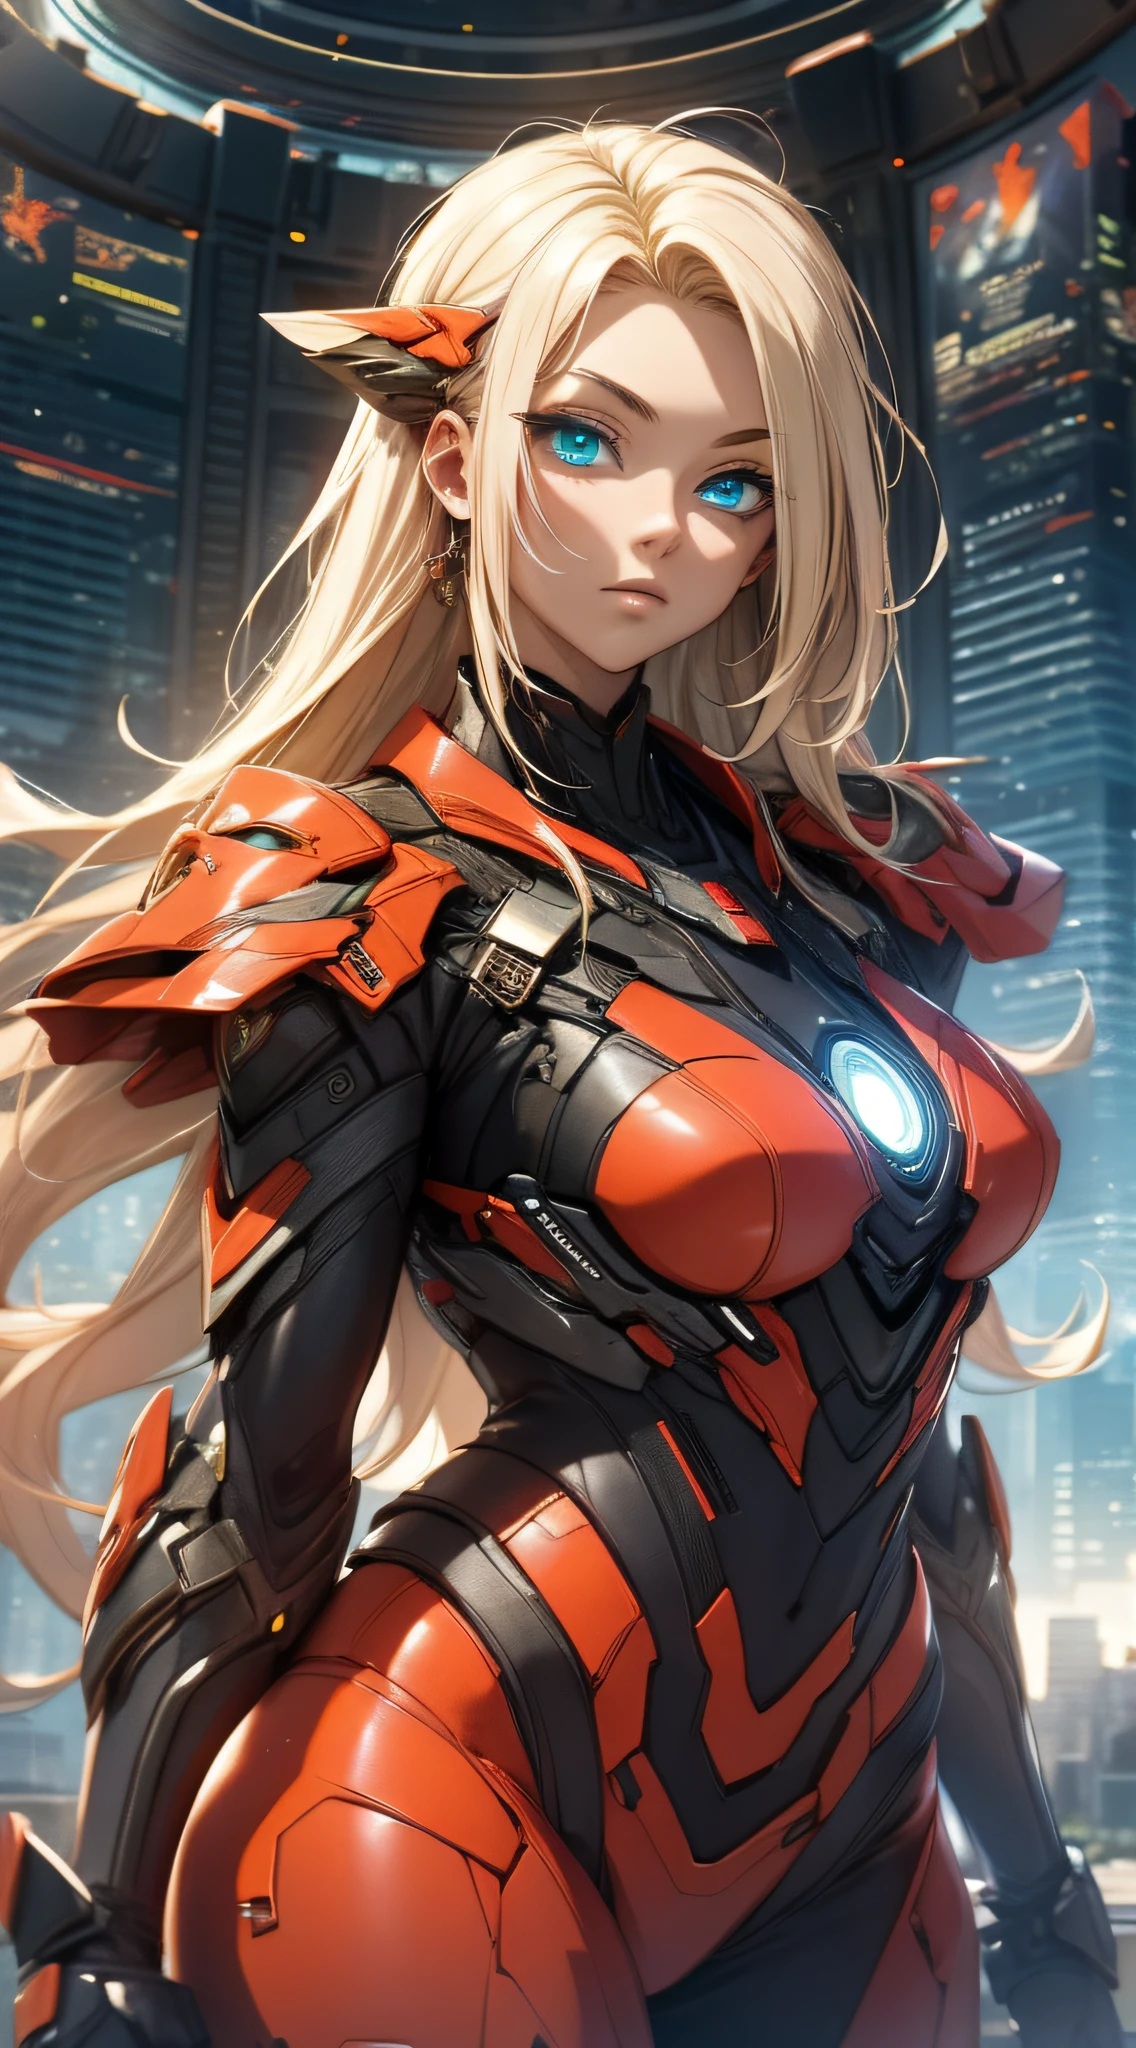 top-quality、Top image quality、​masterpiece、Huge Girl((black mechanic body、Shining red body line、Thorny armor、18year old、 Ager、Best Bust、big bast,Beautiful light blue eyes, Long Blonde Hair、A slender,Large valleys、Reflecting the whole body)),hiquality、Beautiful Art、Background with((chee、Skyscrapers、helicopter、Bolides))​masterpiece、depth of fields,